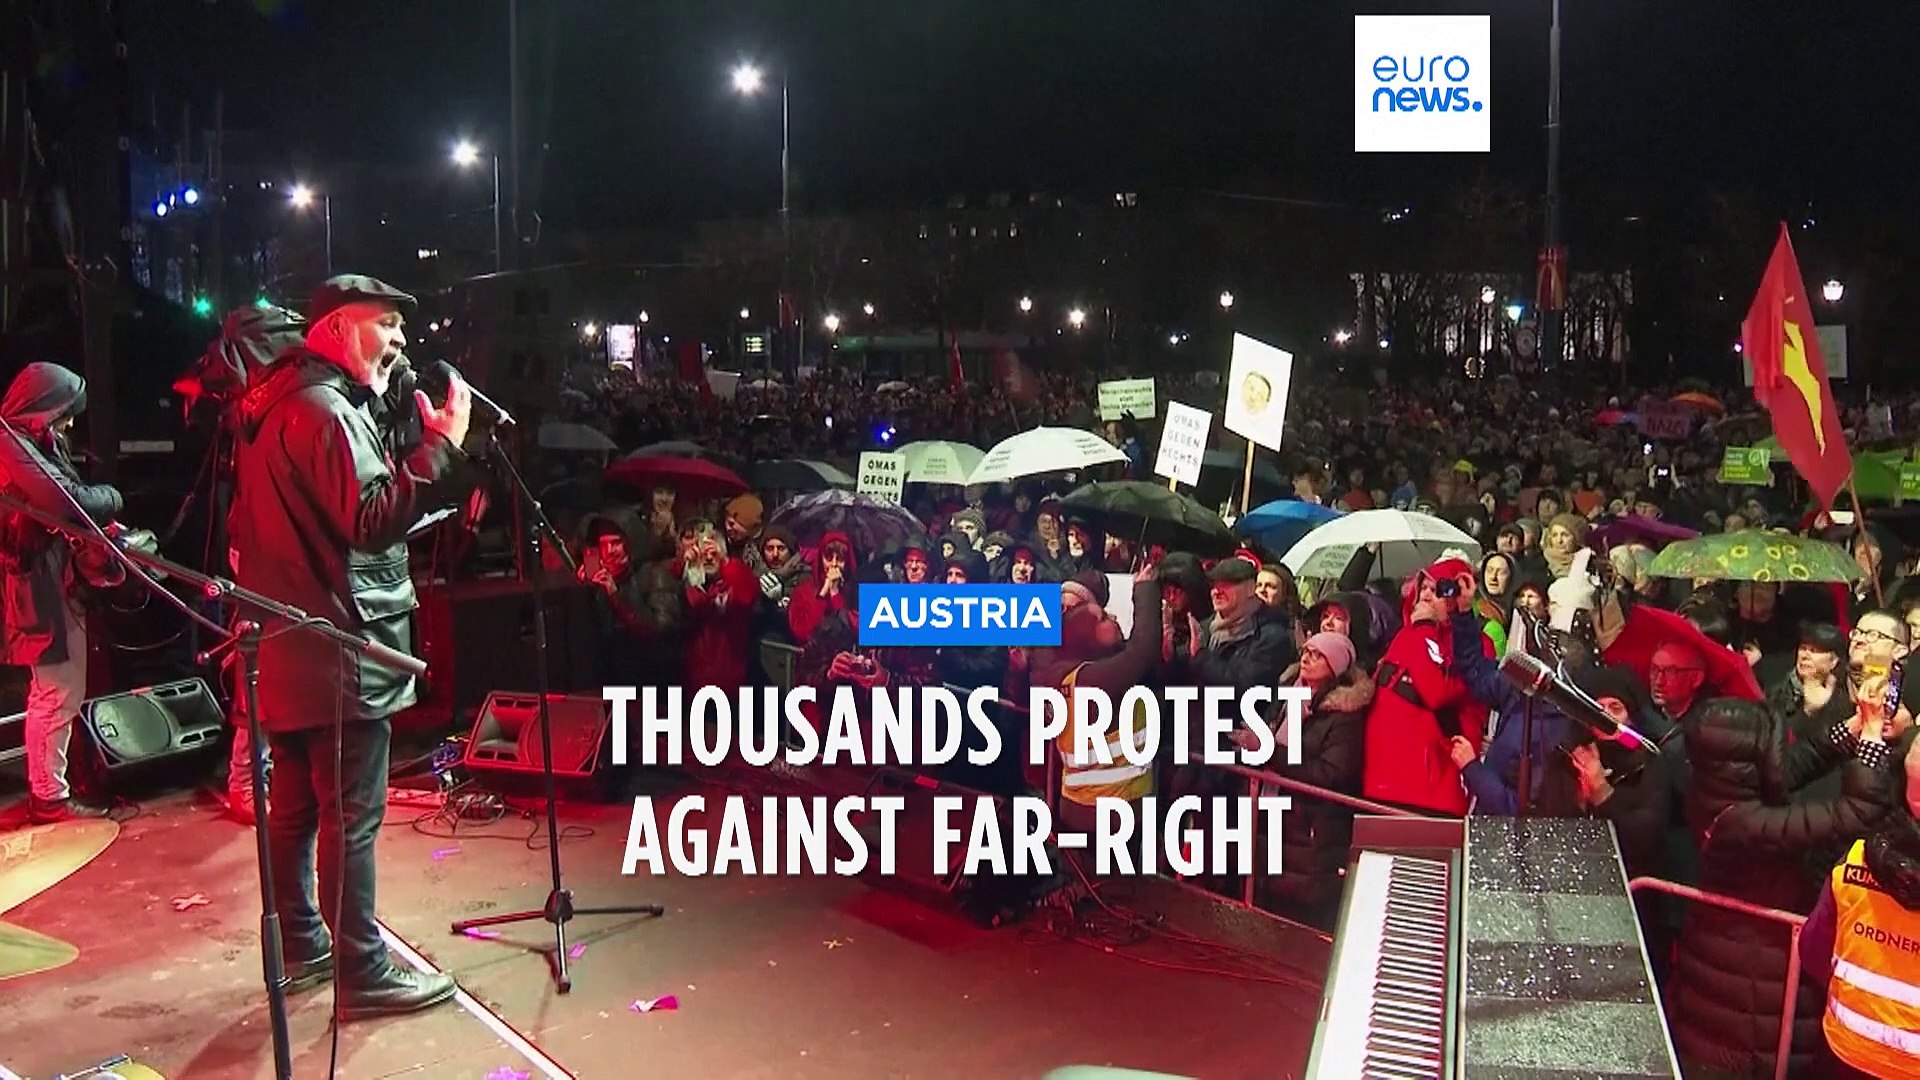 35,000 people protest in Austria against far-right - video Dailymotion